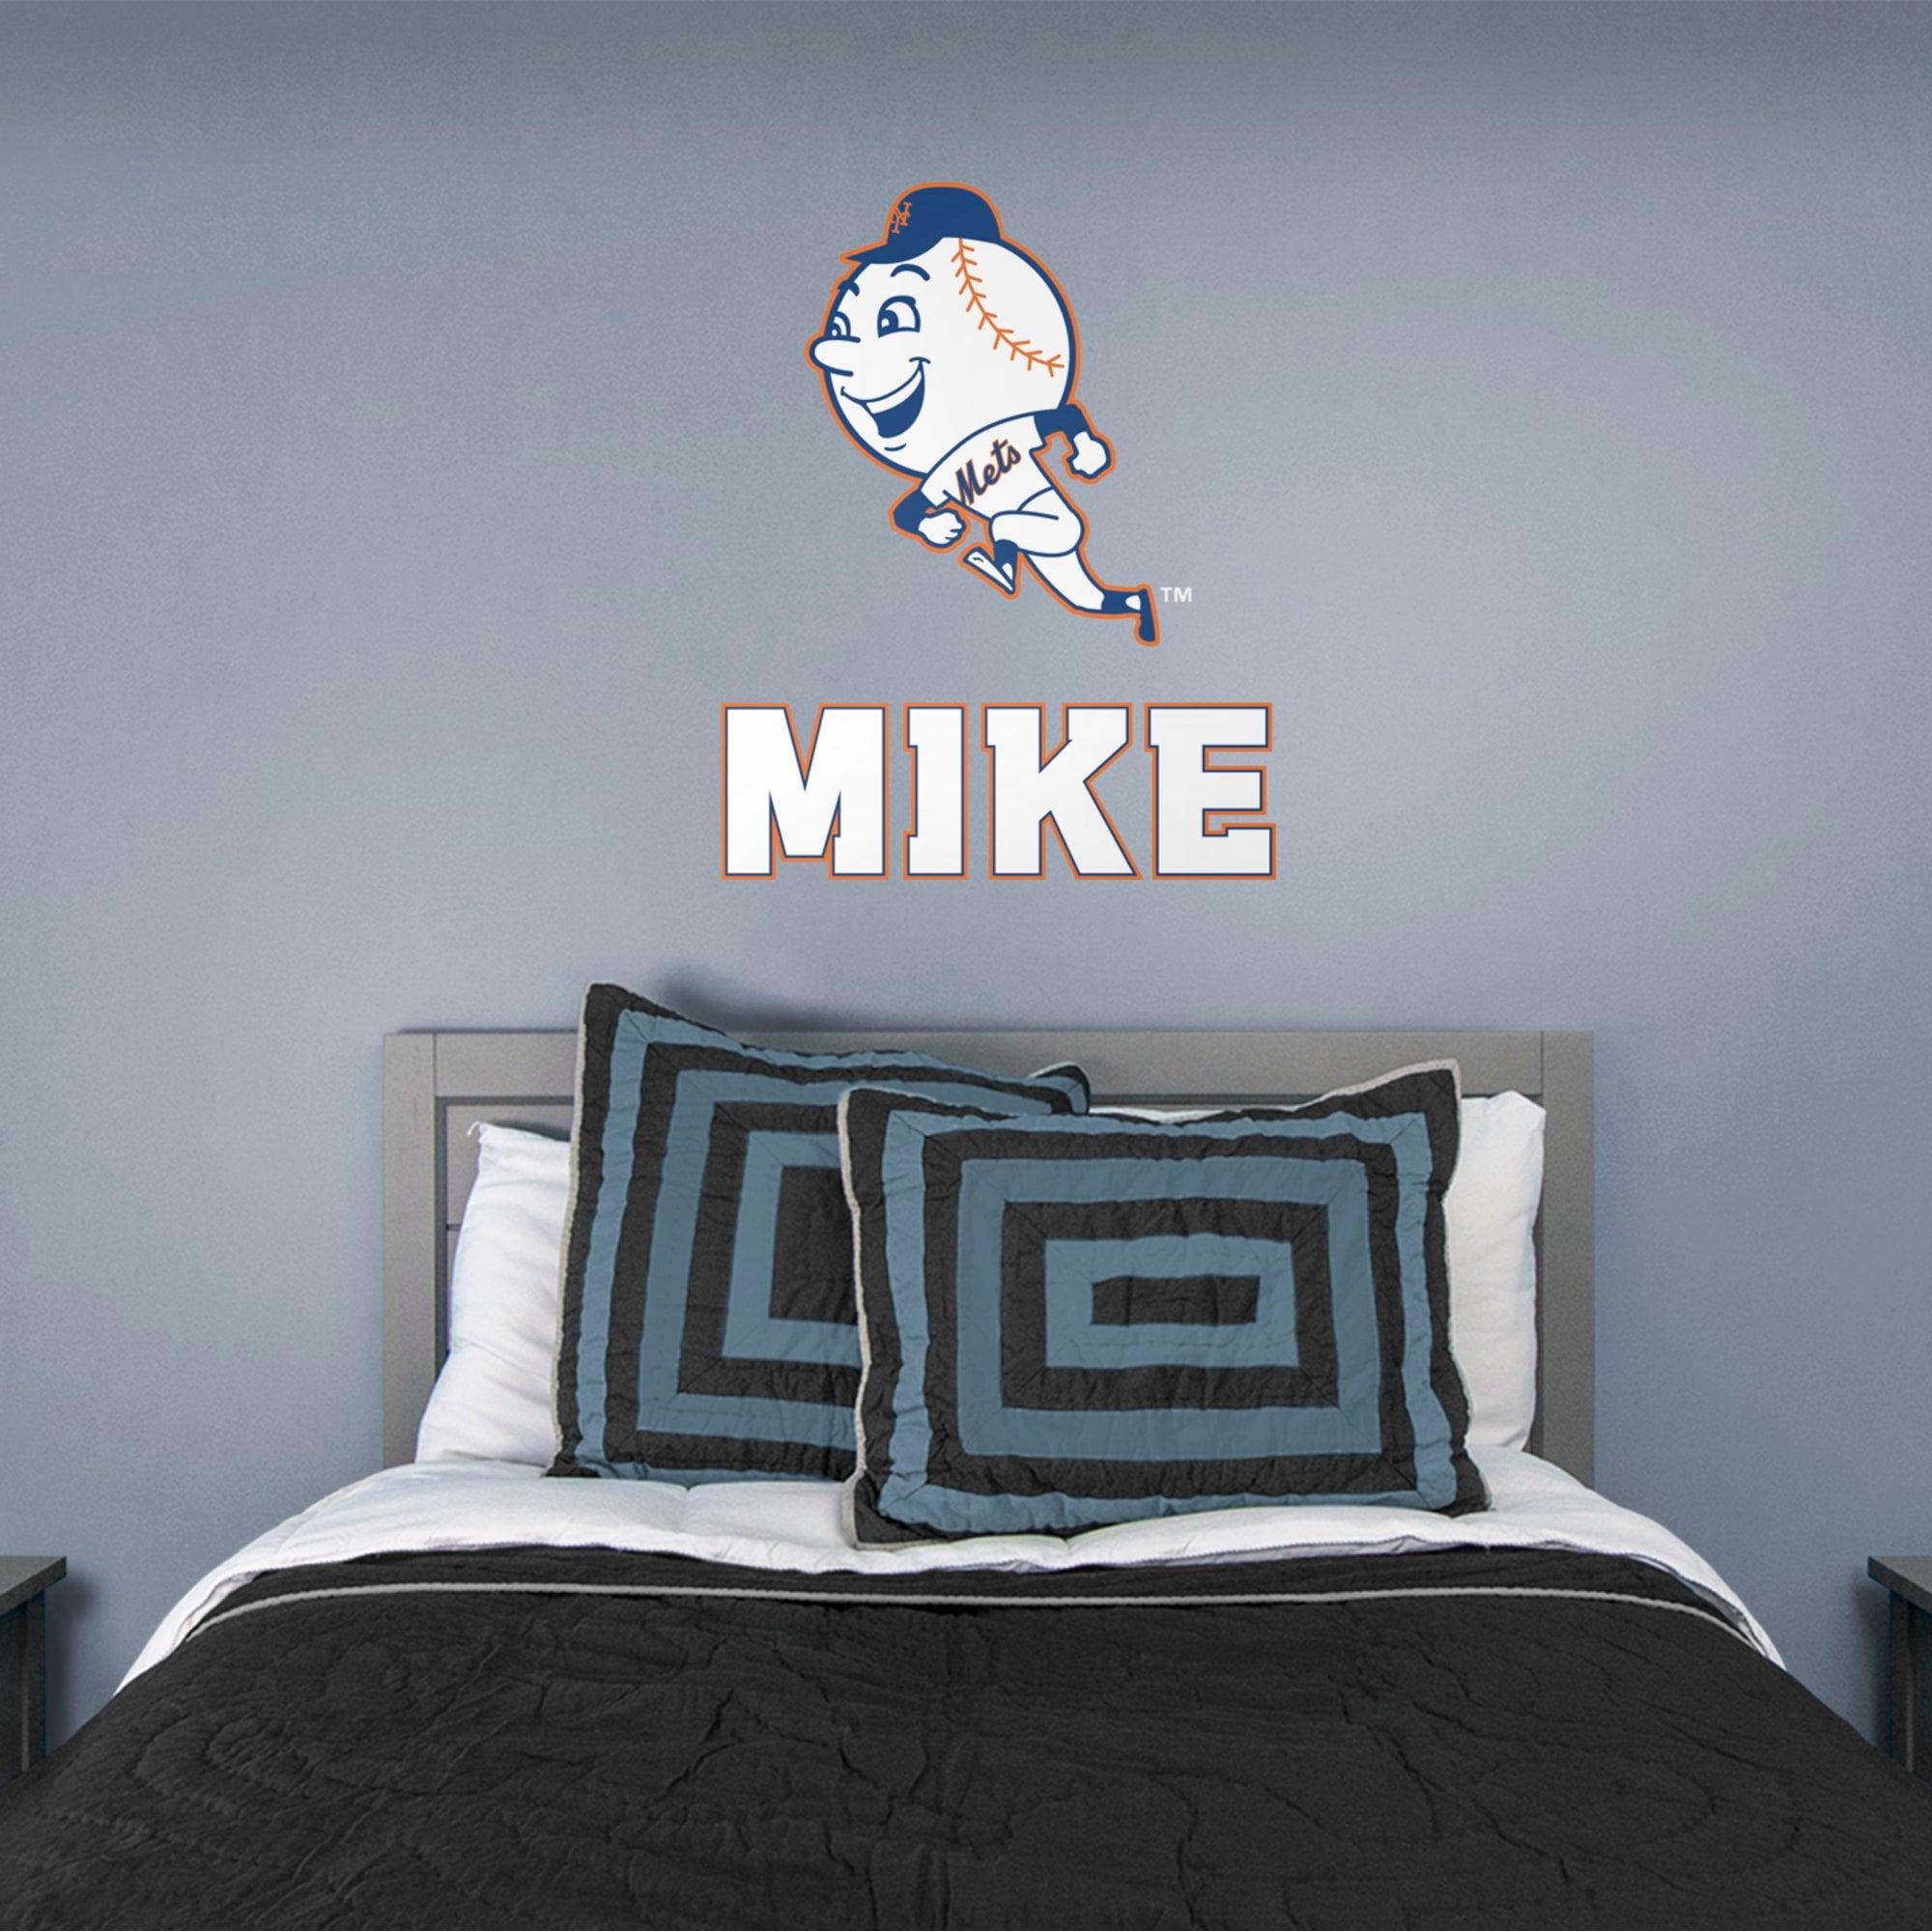 New York Mets: Mr. Met Stacked Personalized Name - Officially Licensed MLB Transfer Decal in White (52"W x 39.5"H) by Fathead |